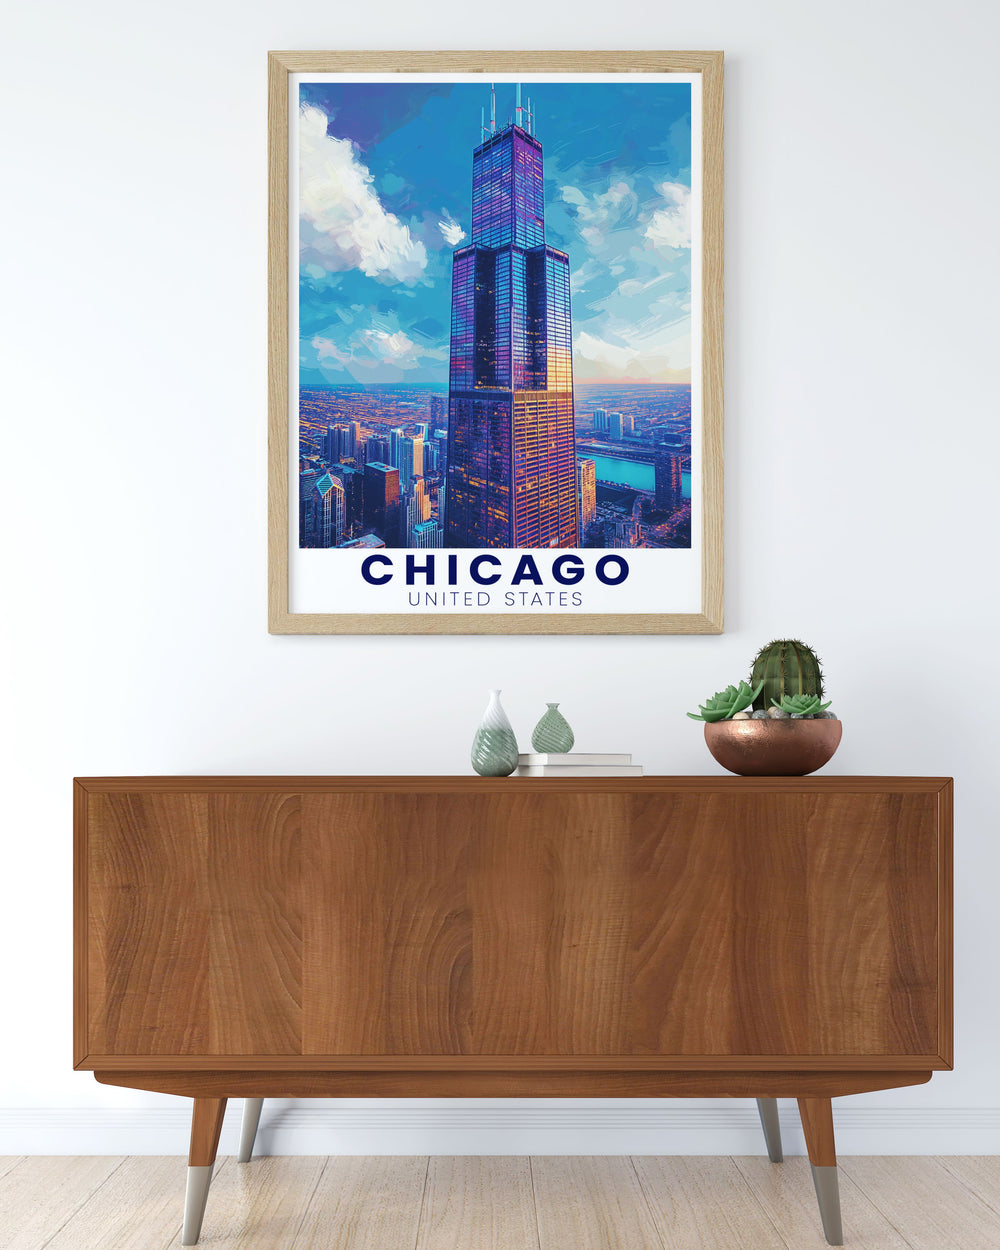 Vintage Willis Tower travel poster showcasing the iconic tower and the bustling Chicago skyline perfect for personalized gifts and adding a classic touch to your wall art collection.